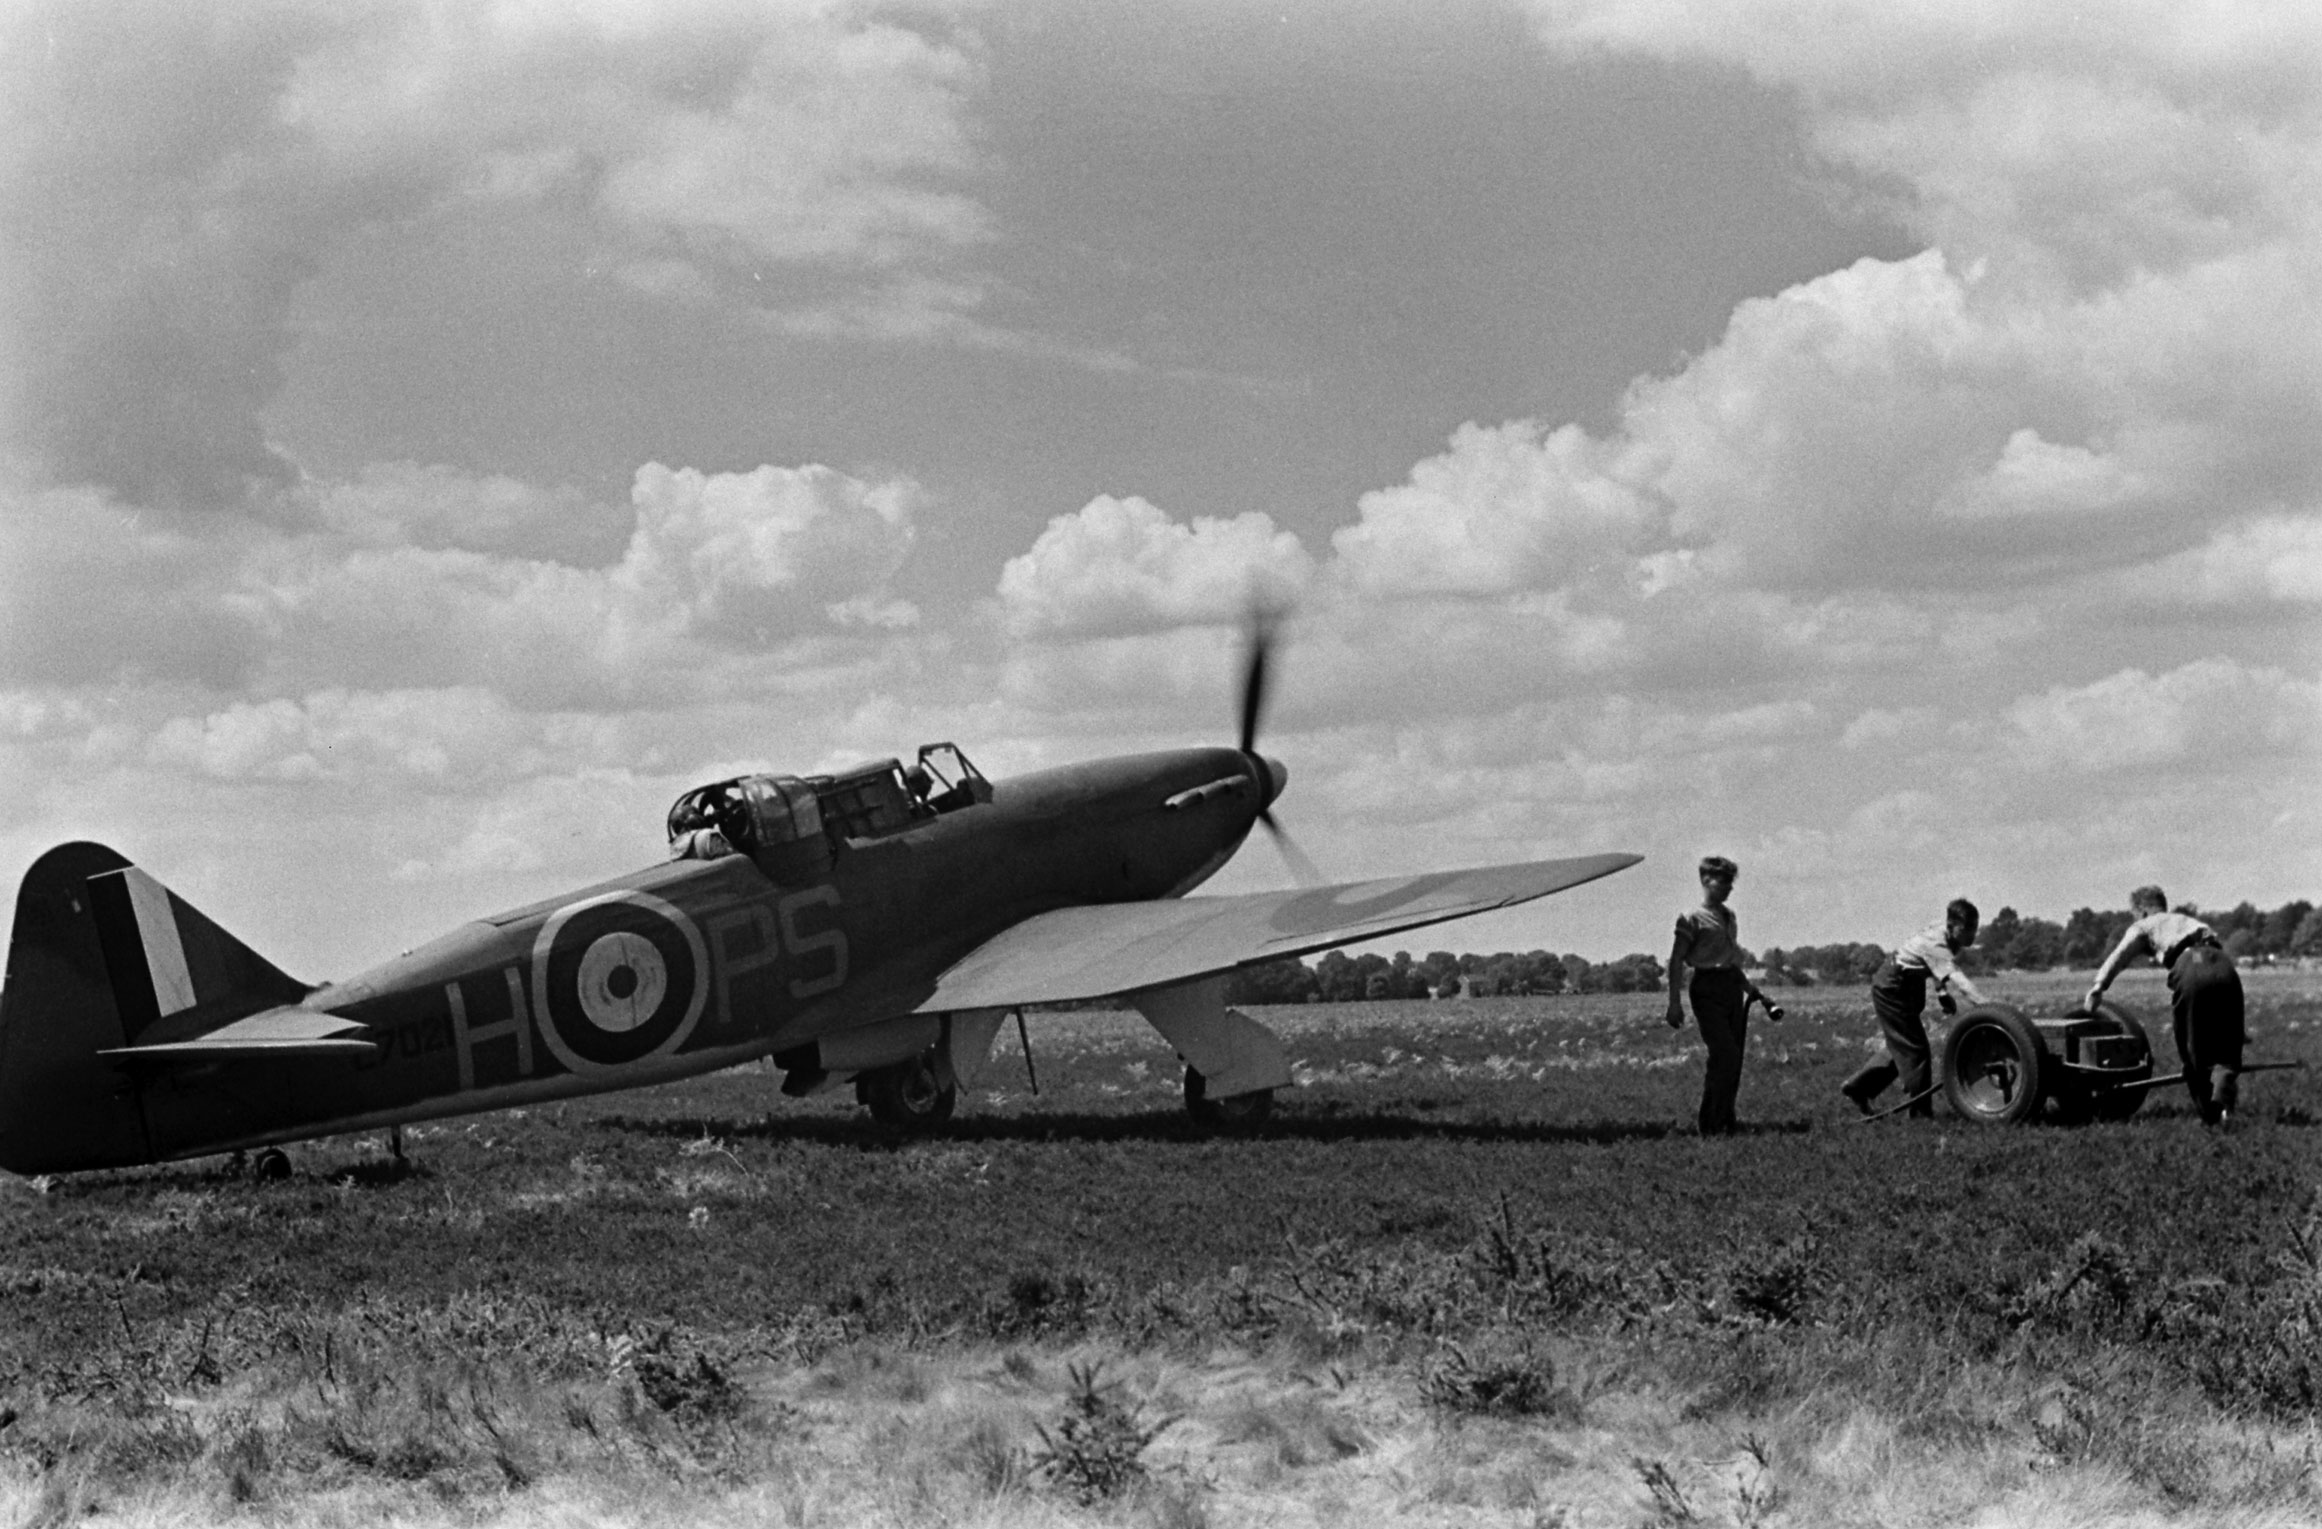 Scene during the Battle of Britain, RAF Fighter Command airfield, 1940.